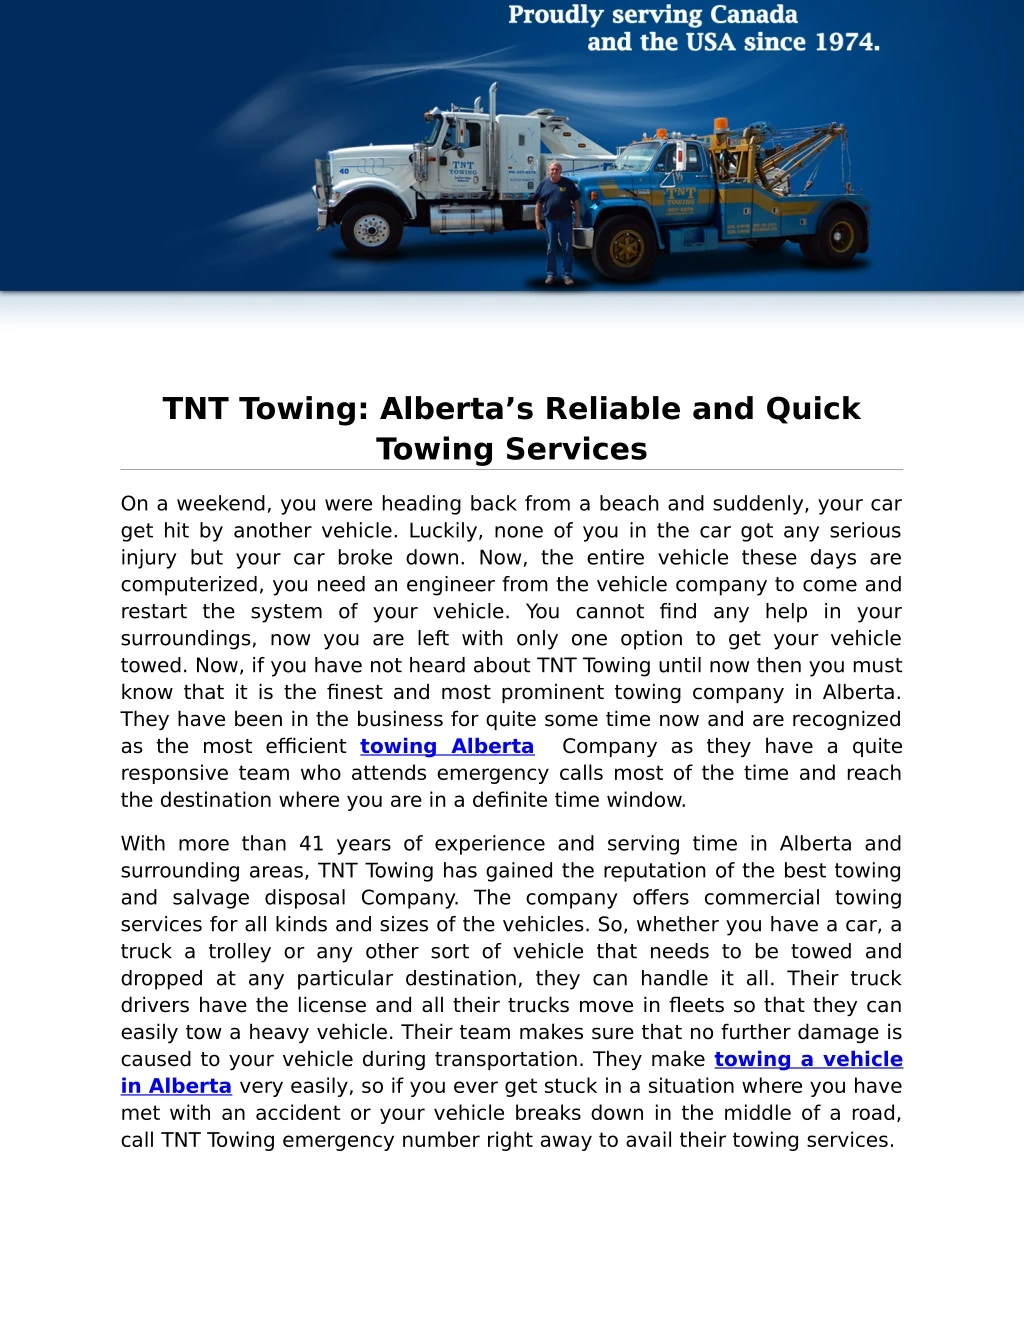 tnt towing alberta s reliable and quick towing